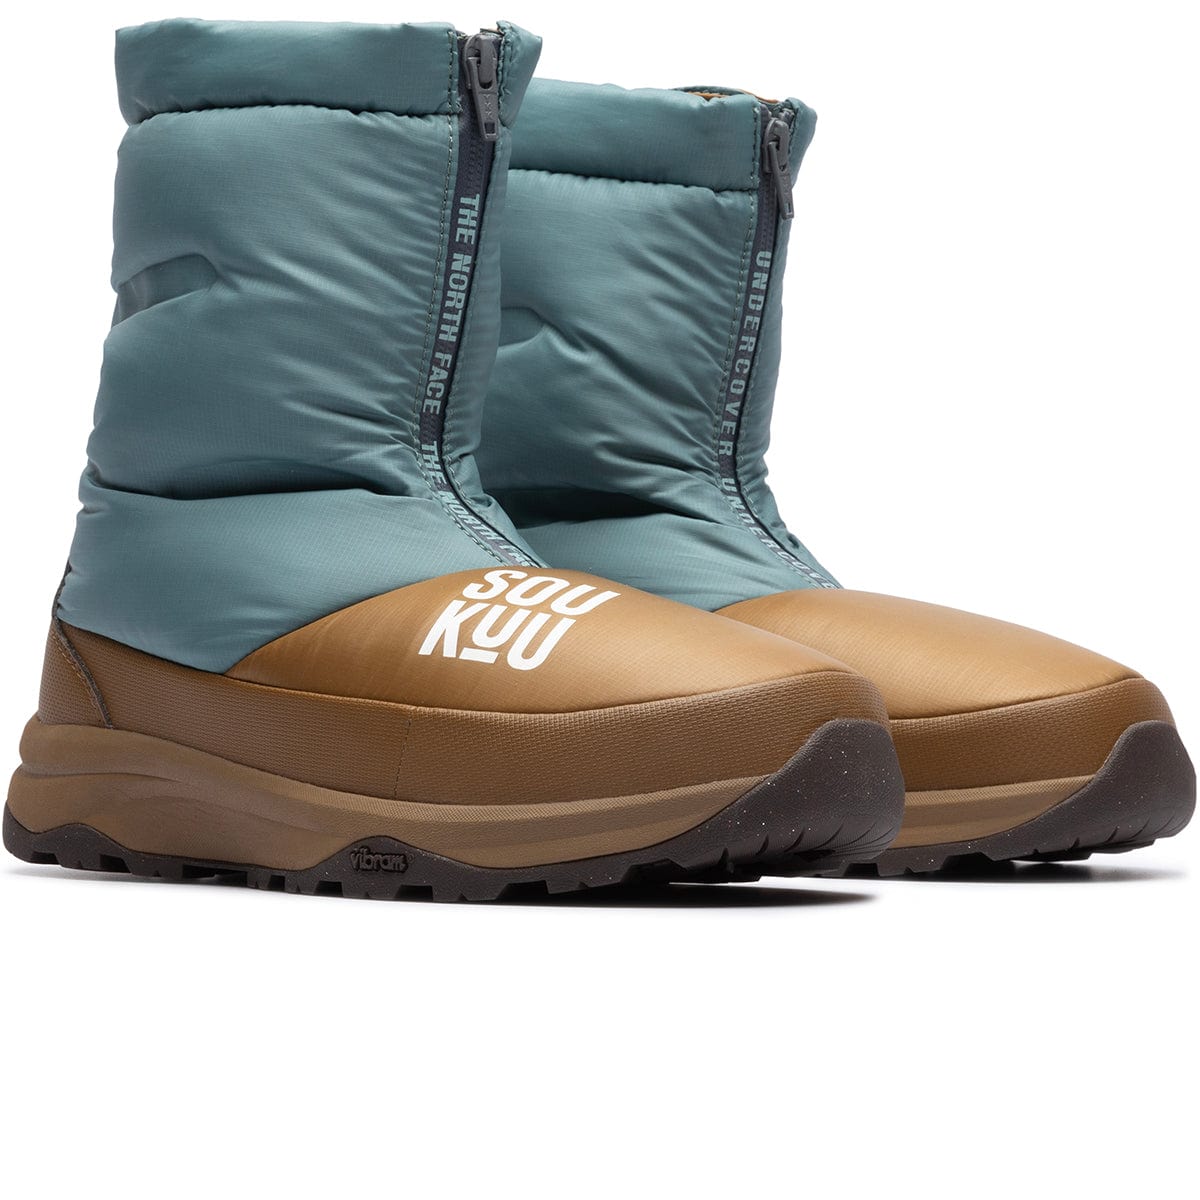 SOUKUU BY THE NORTH FACE X UNDERCOVER PROJECT U NUPTSE DOWN BOOT